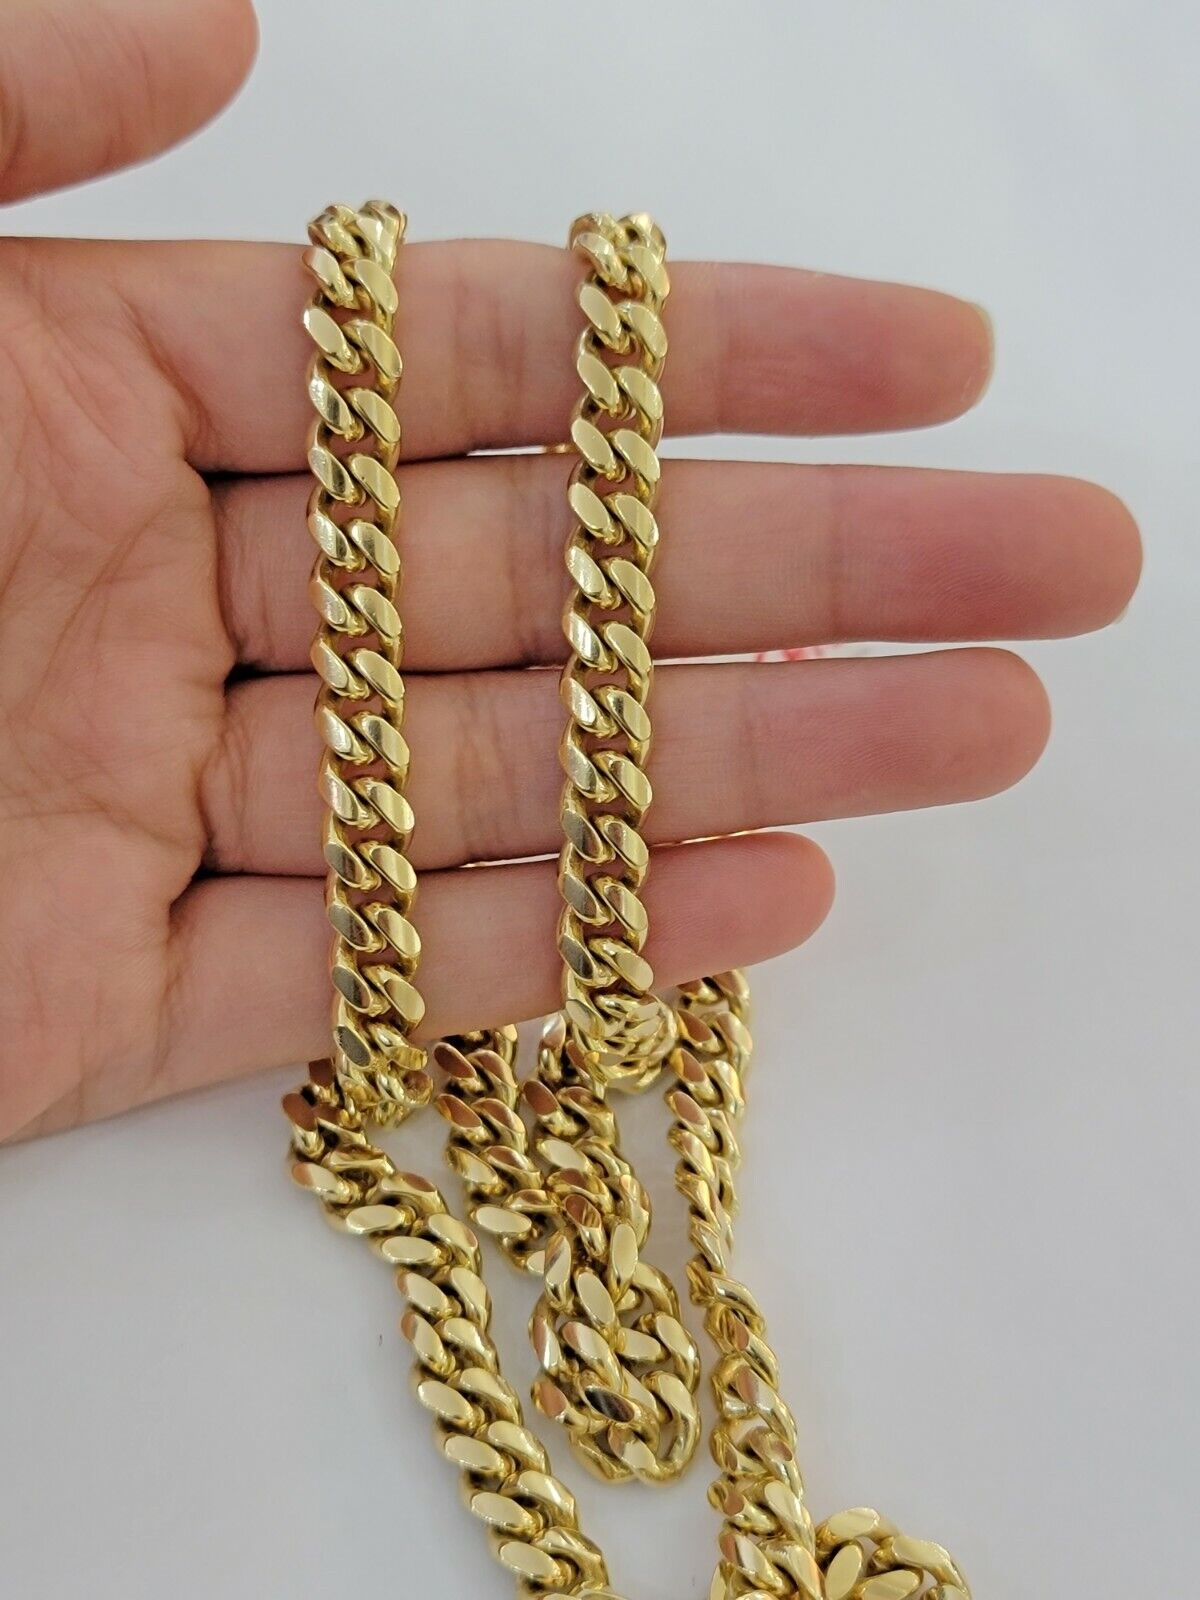 Solid 14k Yellow Gold Chain Necklace 7mm Miami Cuban Link 18"Short Choker Length